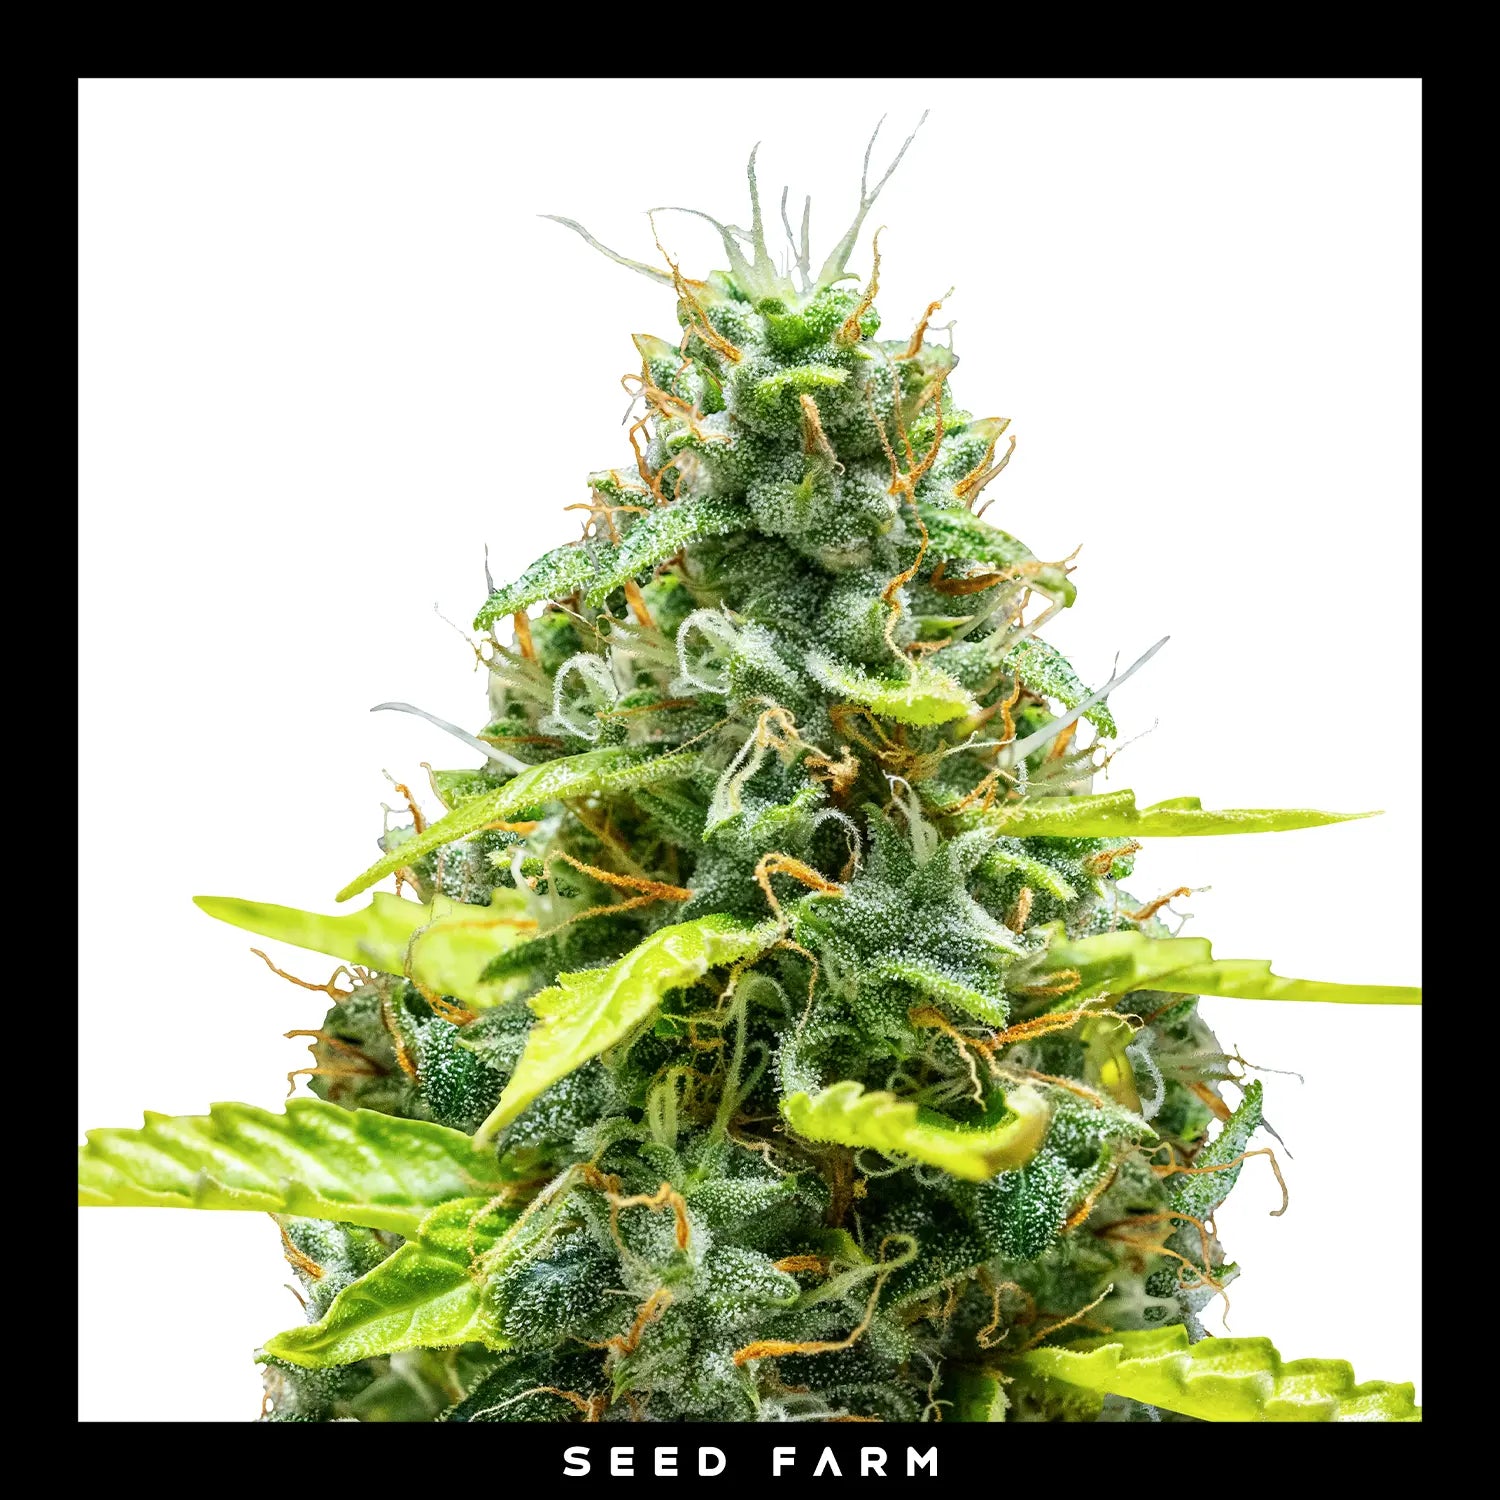 Royal Queen Seeds - ROYAL RUNTZ - Automatic